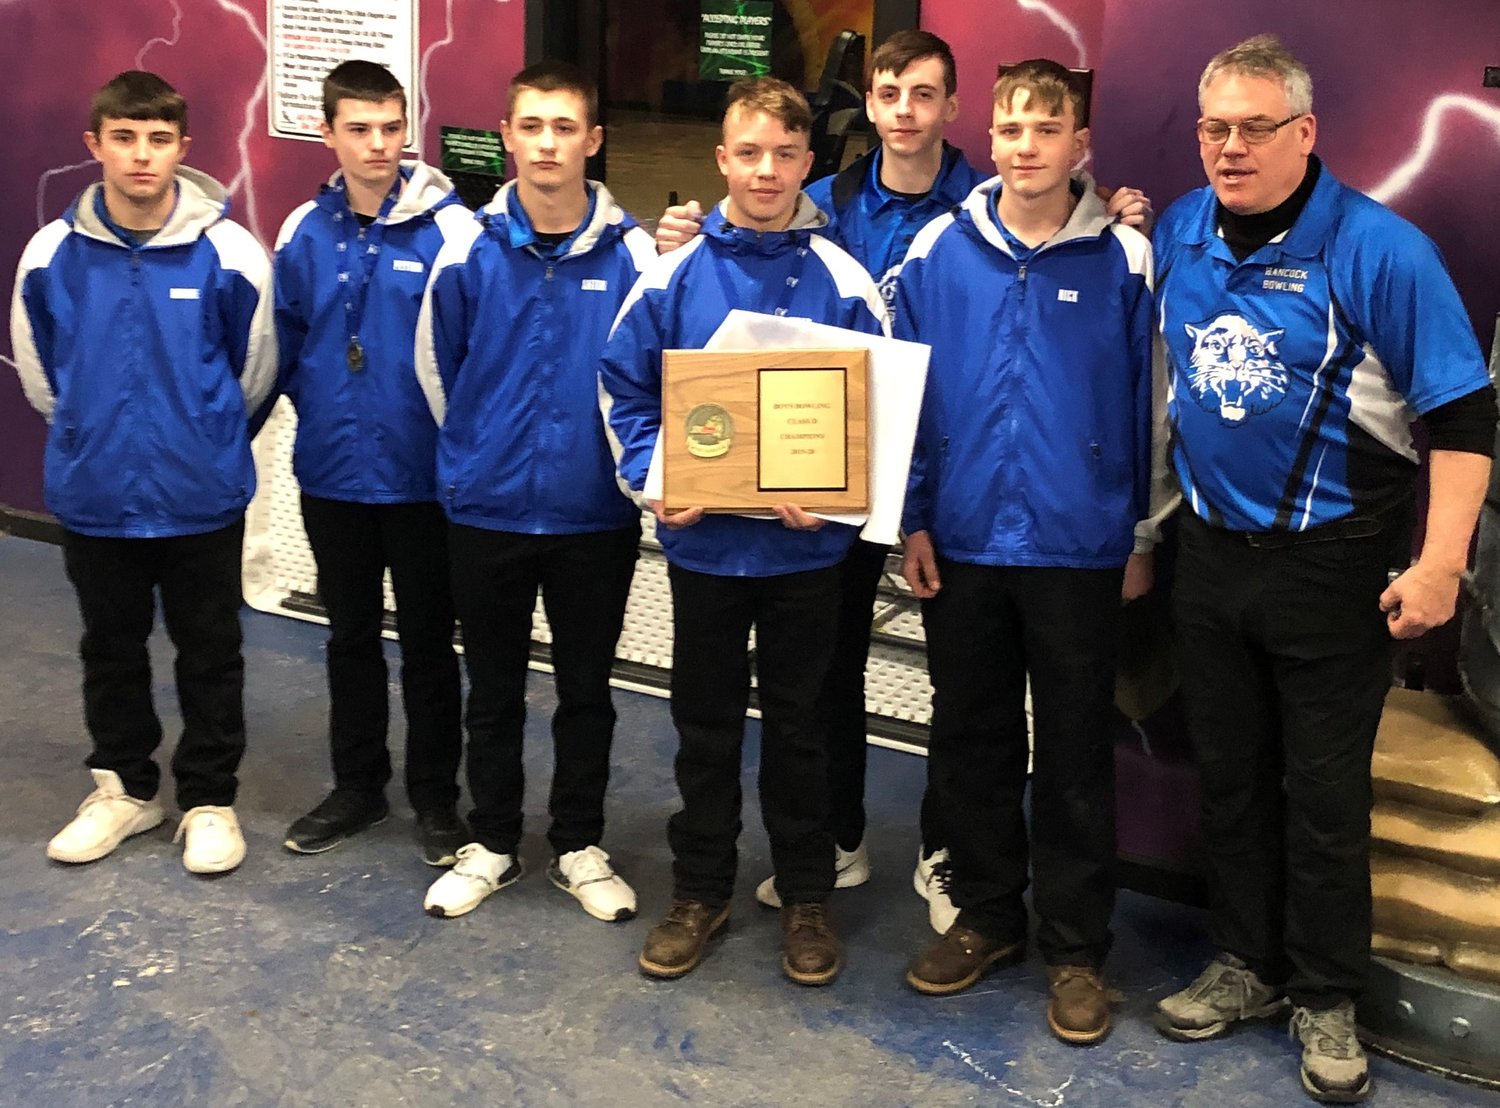 Bill Gleim, right, owner and manager of the Hancock Fox Bowling Center coaches the members of last year's Hancock Central's high school youth bowling team. Previous youth members have brought home Sectional Championships.